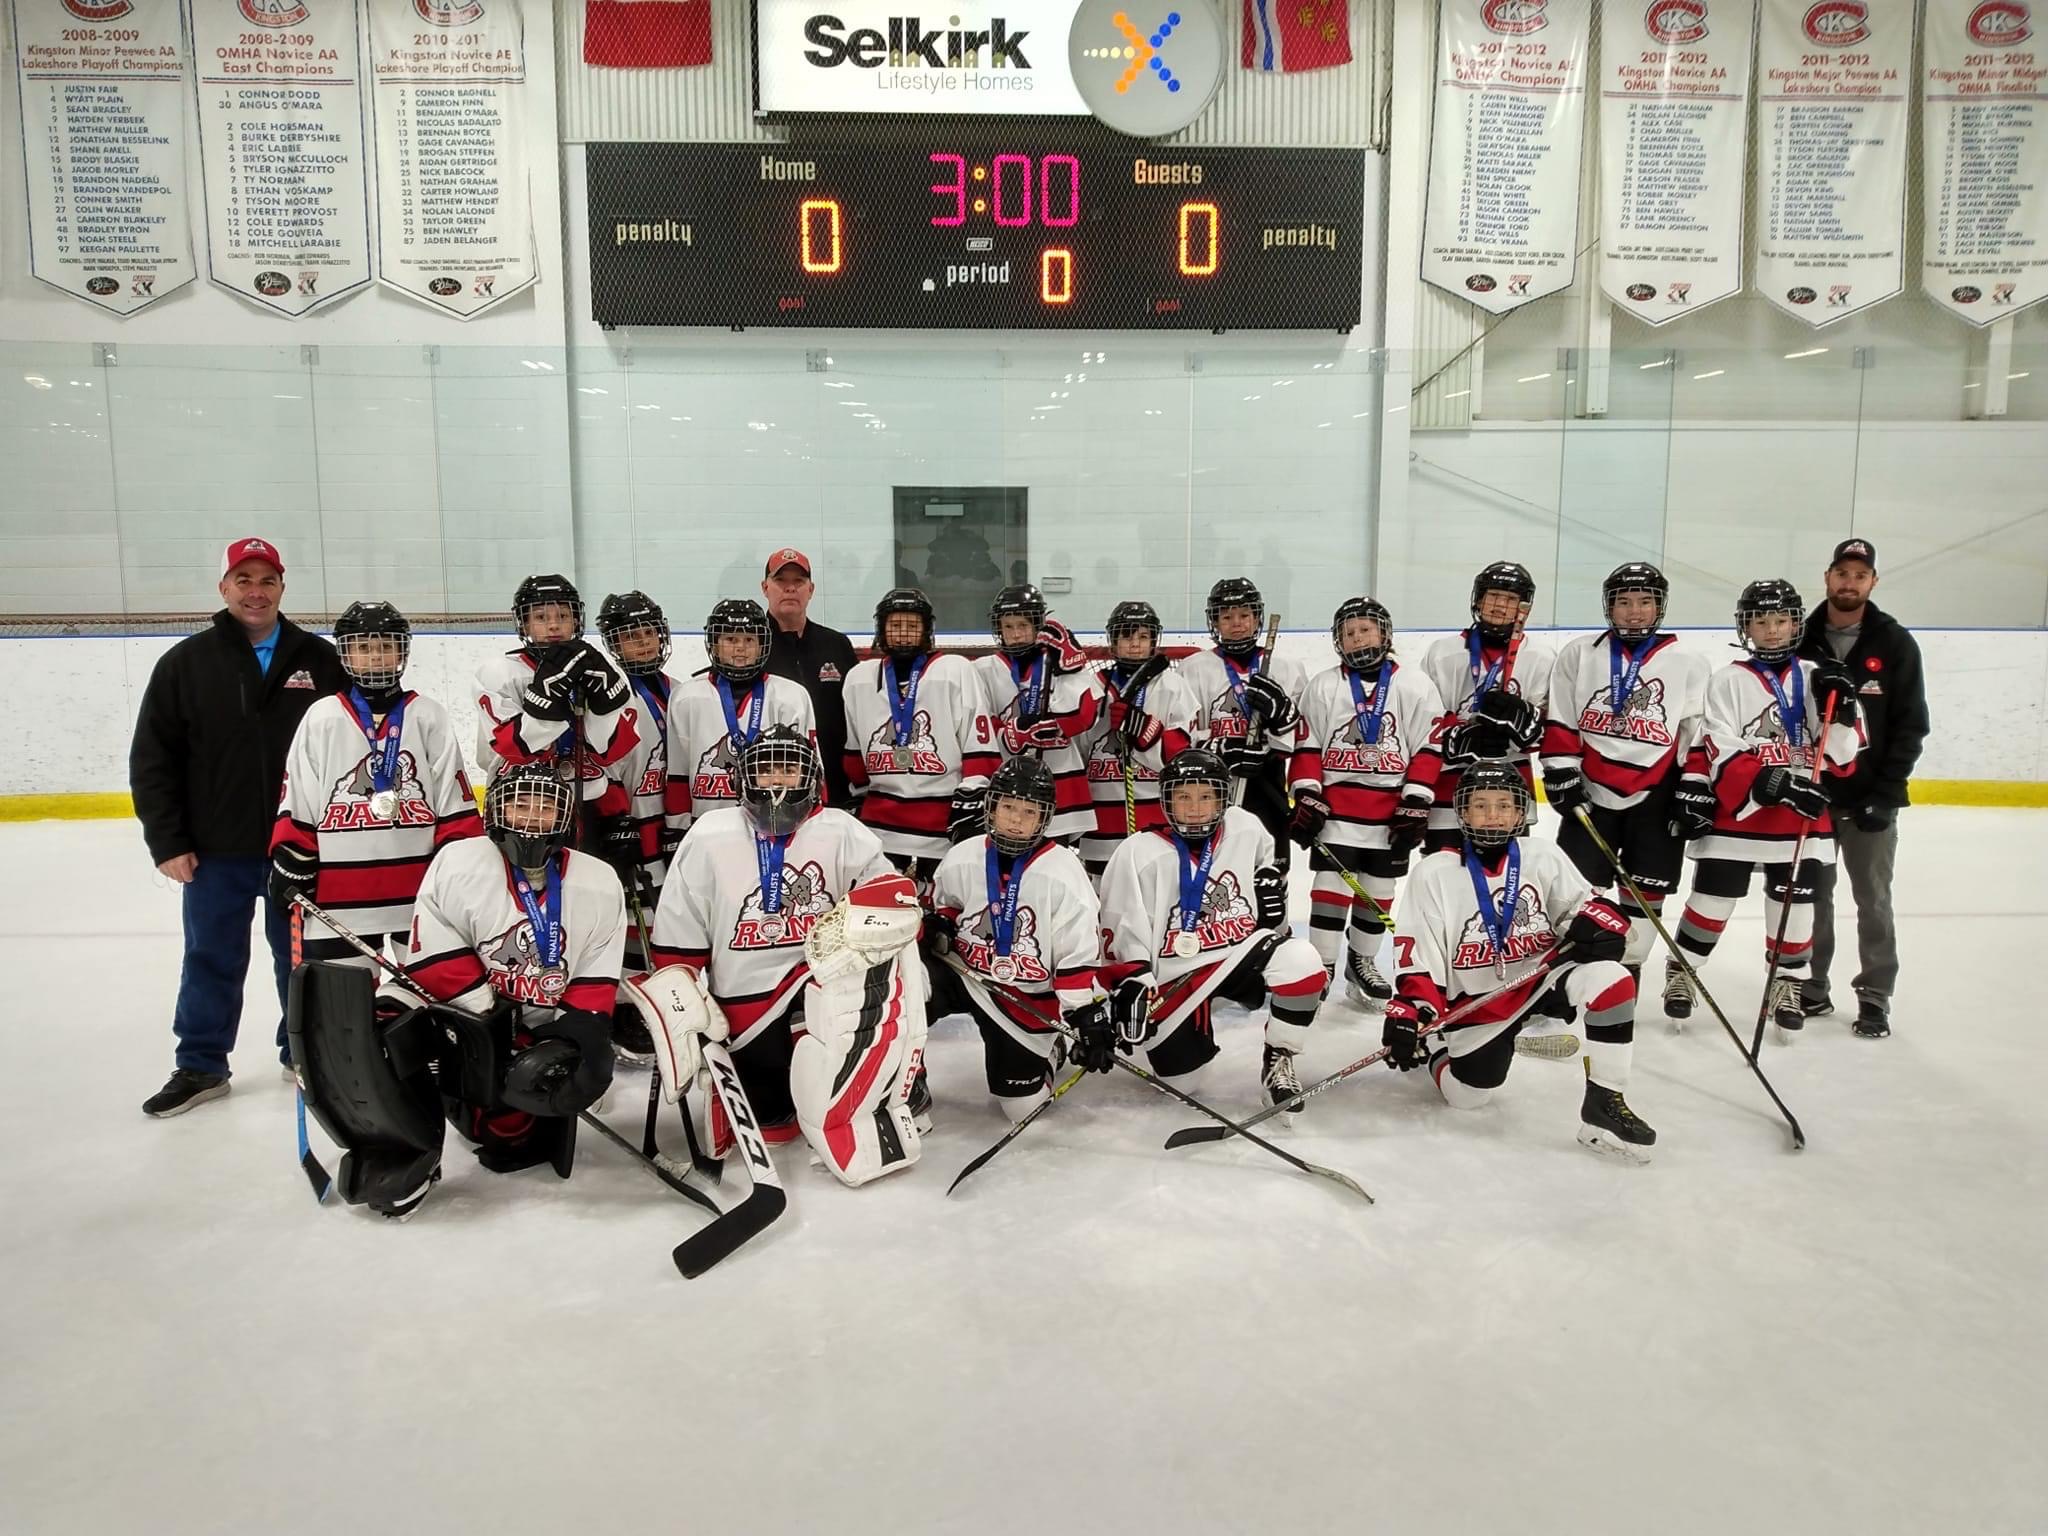 The Stittsville Rams U12 in their game gear on the ice with their coaches